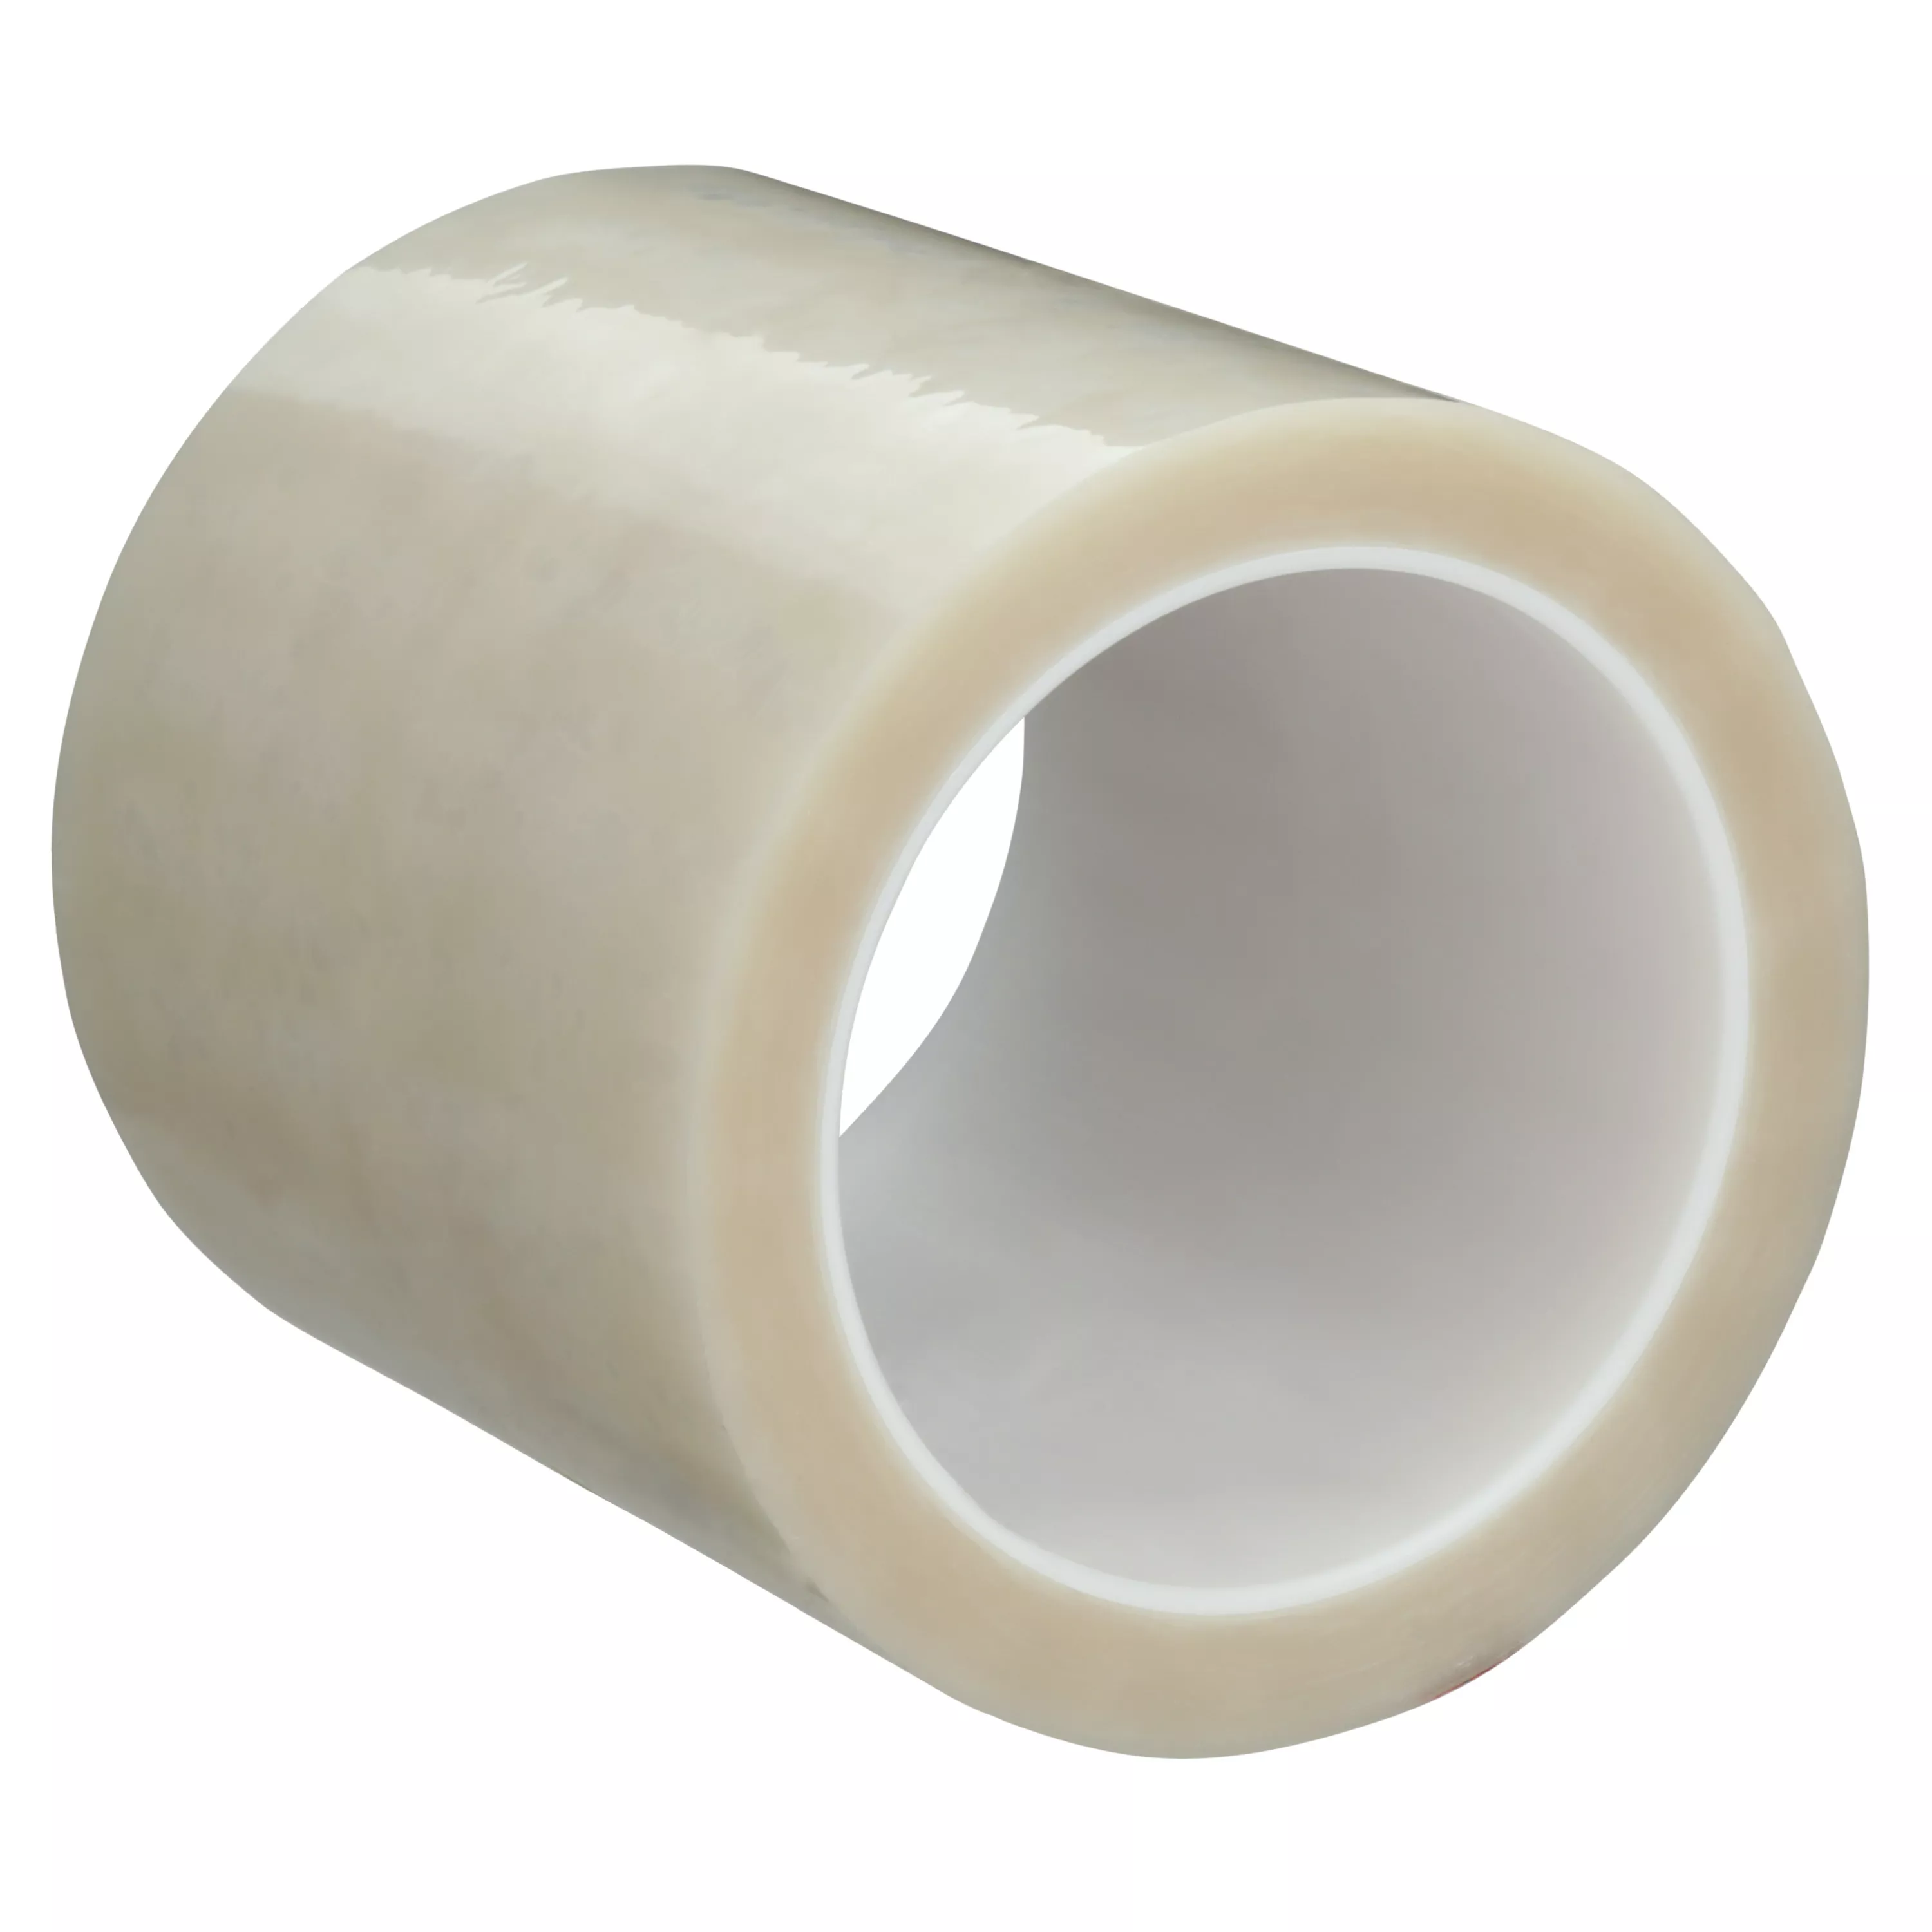 3M™ Polyester Film Tape 850, Transparent, 3 in x 72 yd, 1.9 mil, 12
Roll/Case